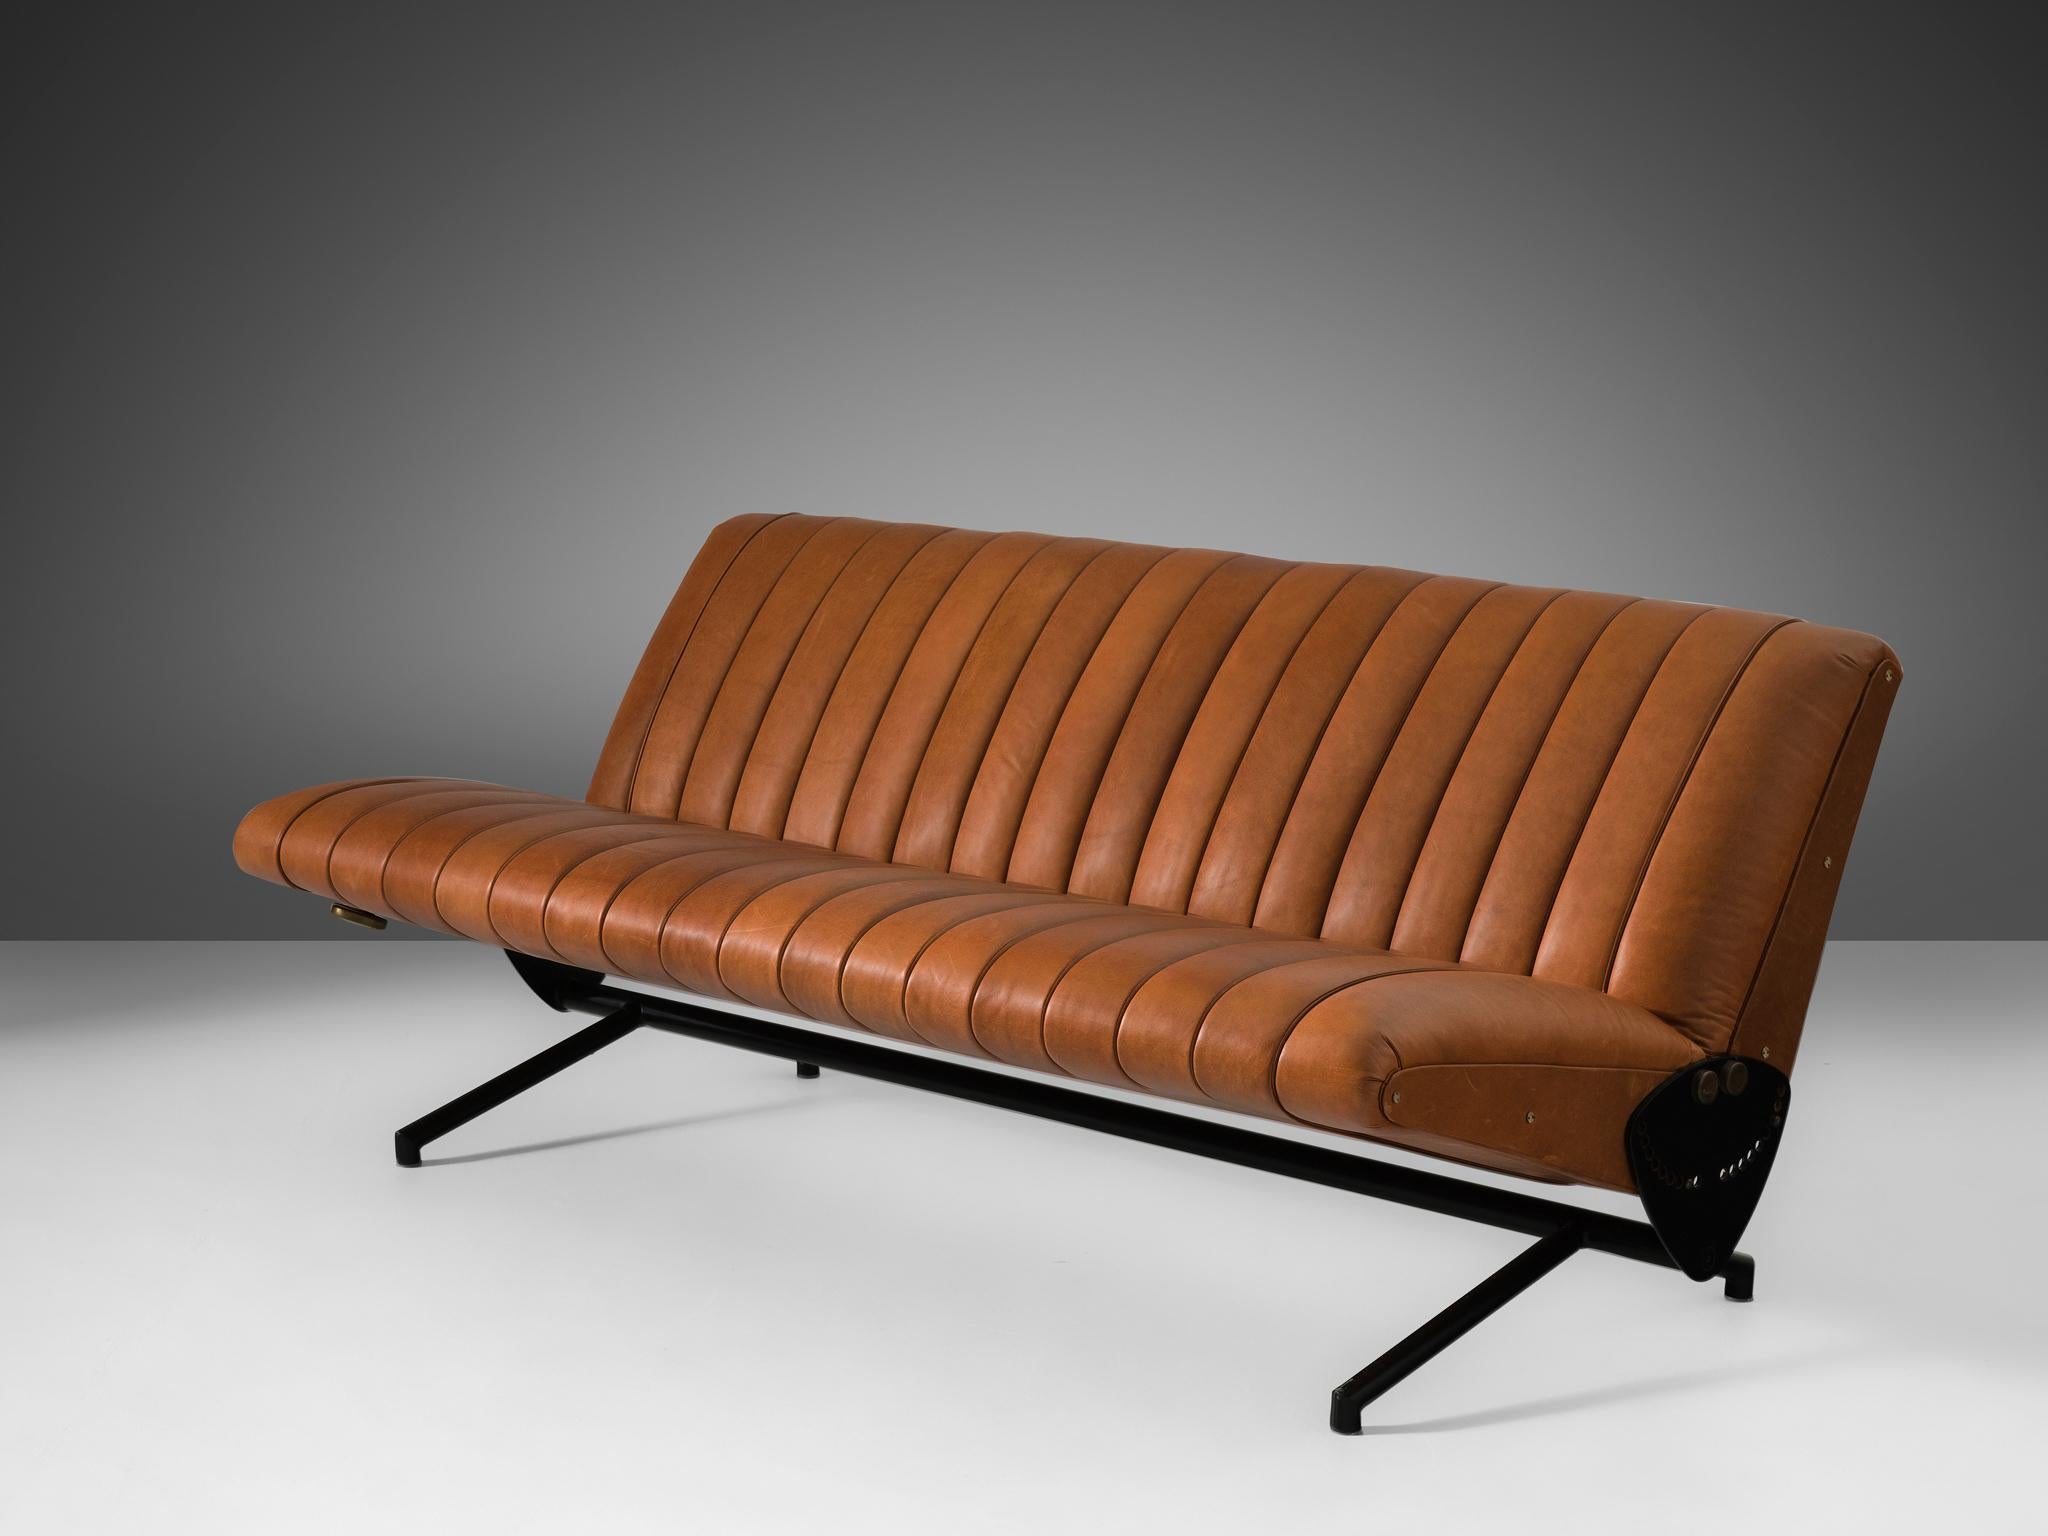 Osvaldo Borsani for Tecno, sofa, model, 'D70', steel, brass, leather, Italy, 1954

A sofa that transforms into a daybed designed by Osvaldo Borsani in 1954. Extraordinary elegance in form, and also outstanding in a technical sense. With a single